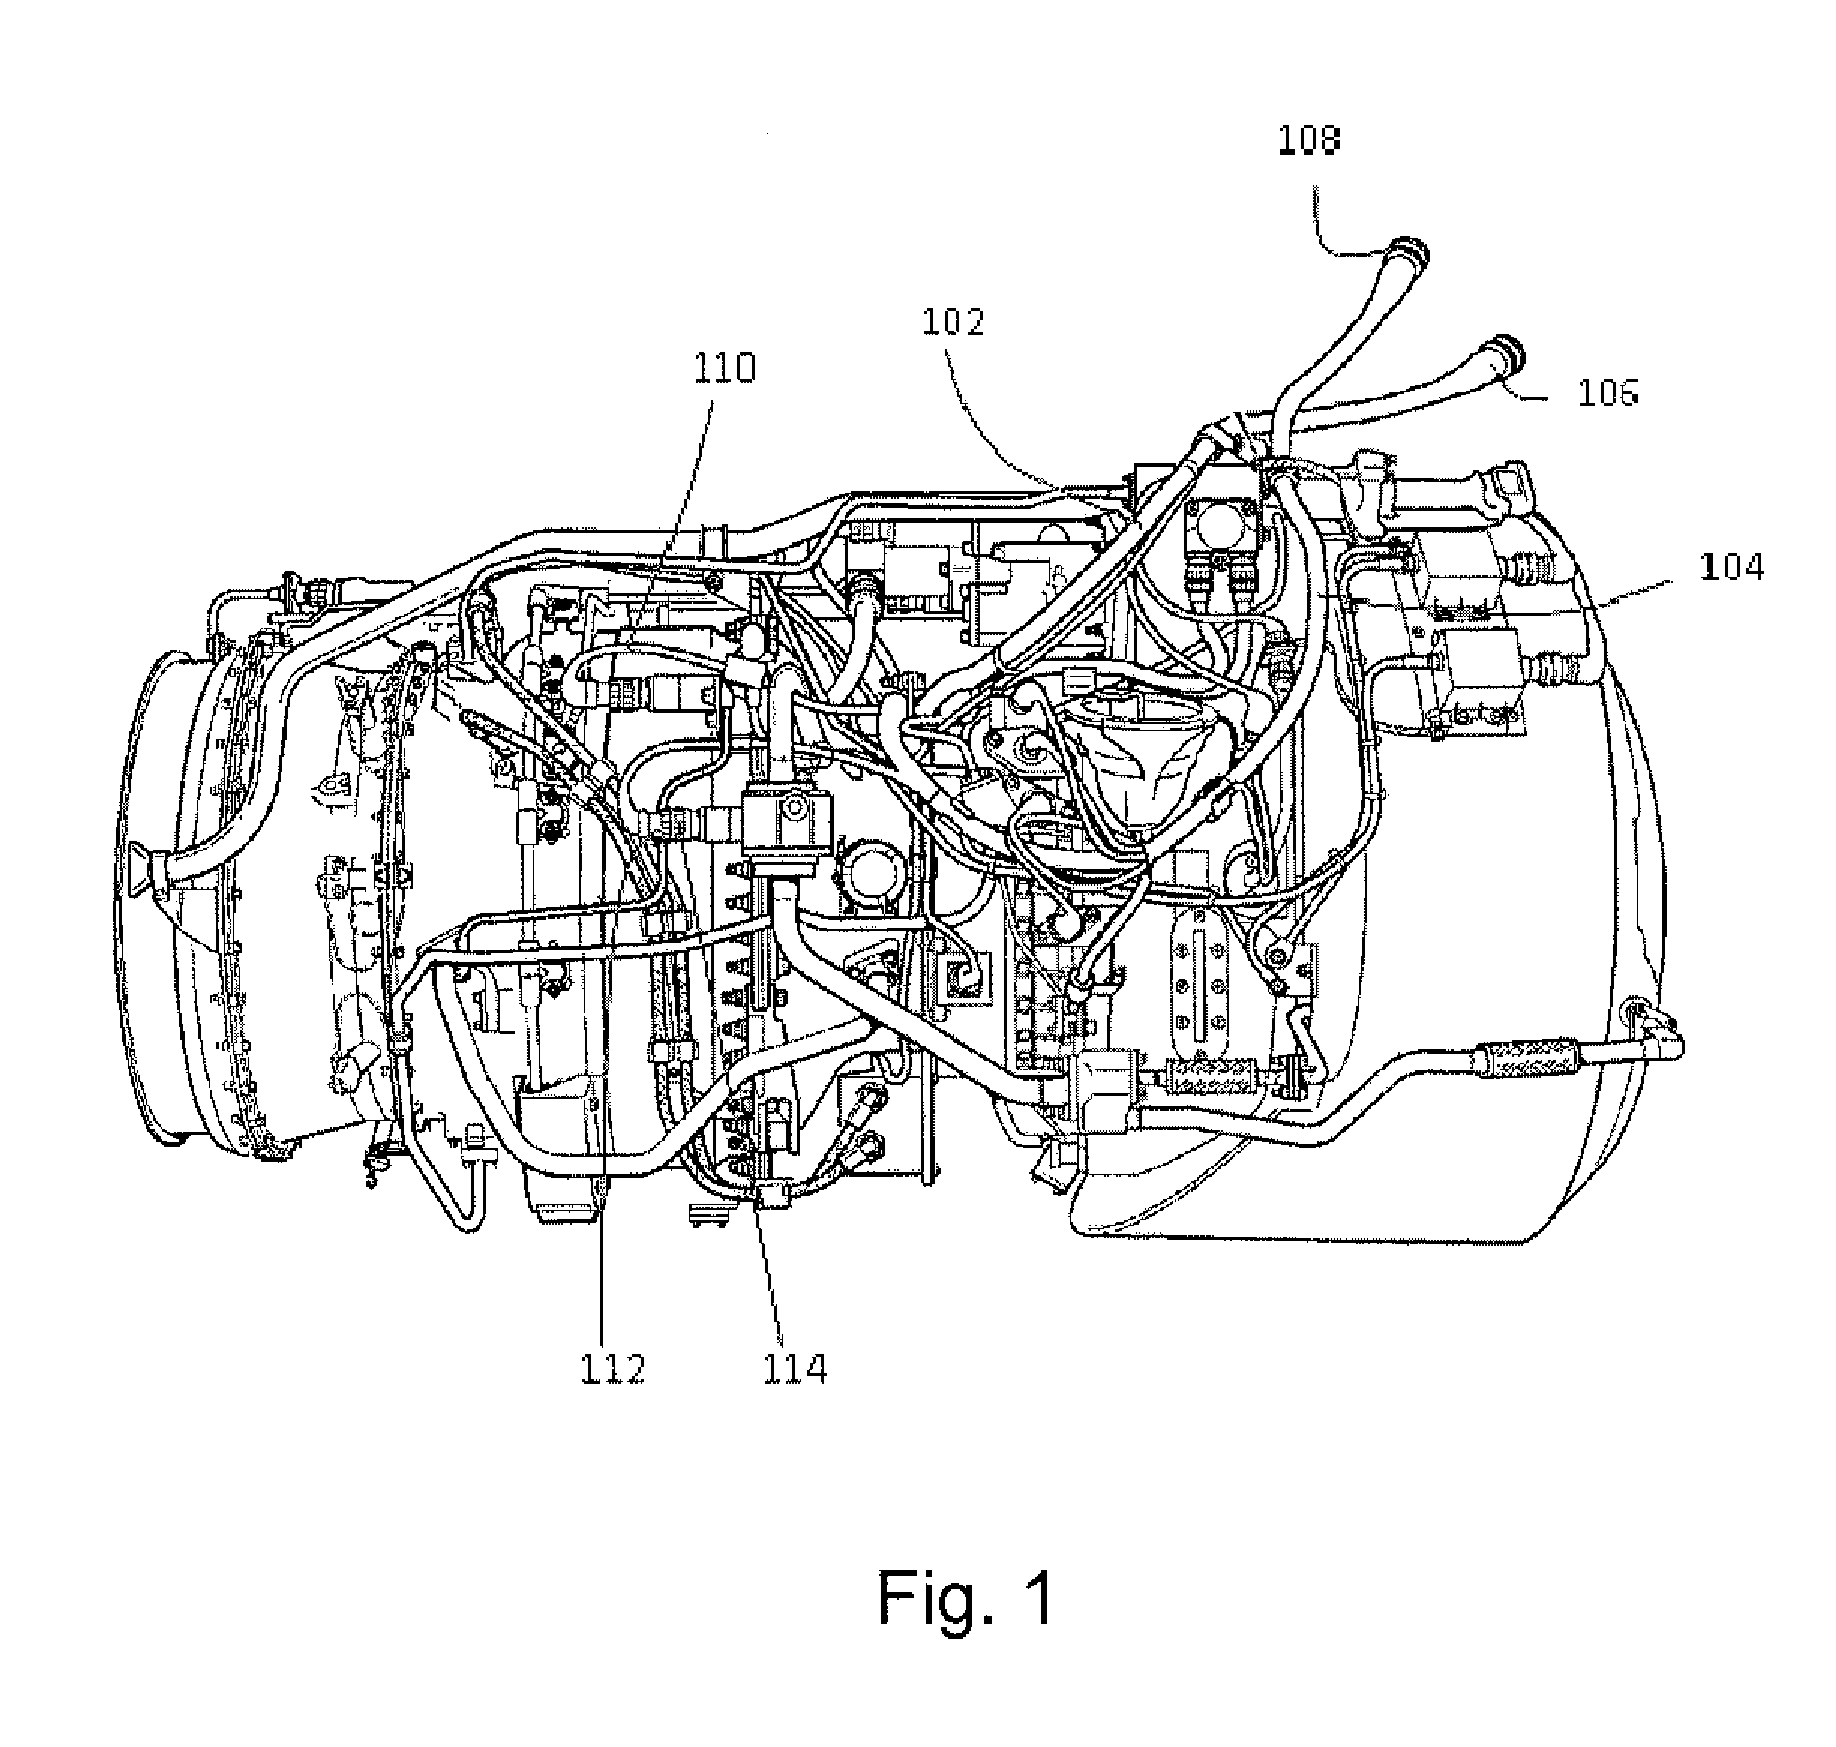 Component having insert for receiving threaded fasteners